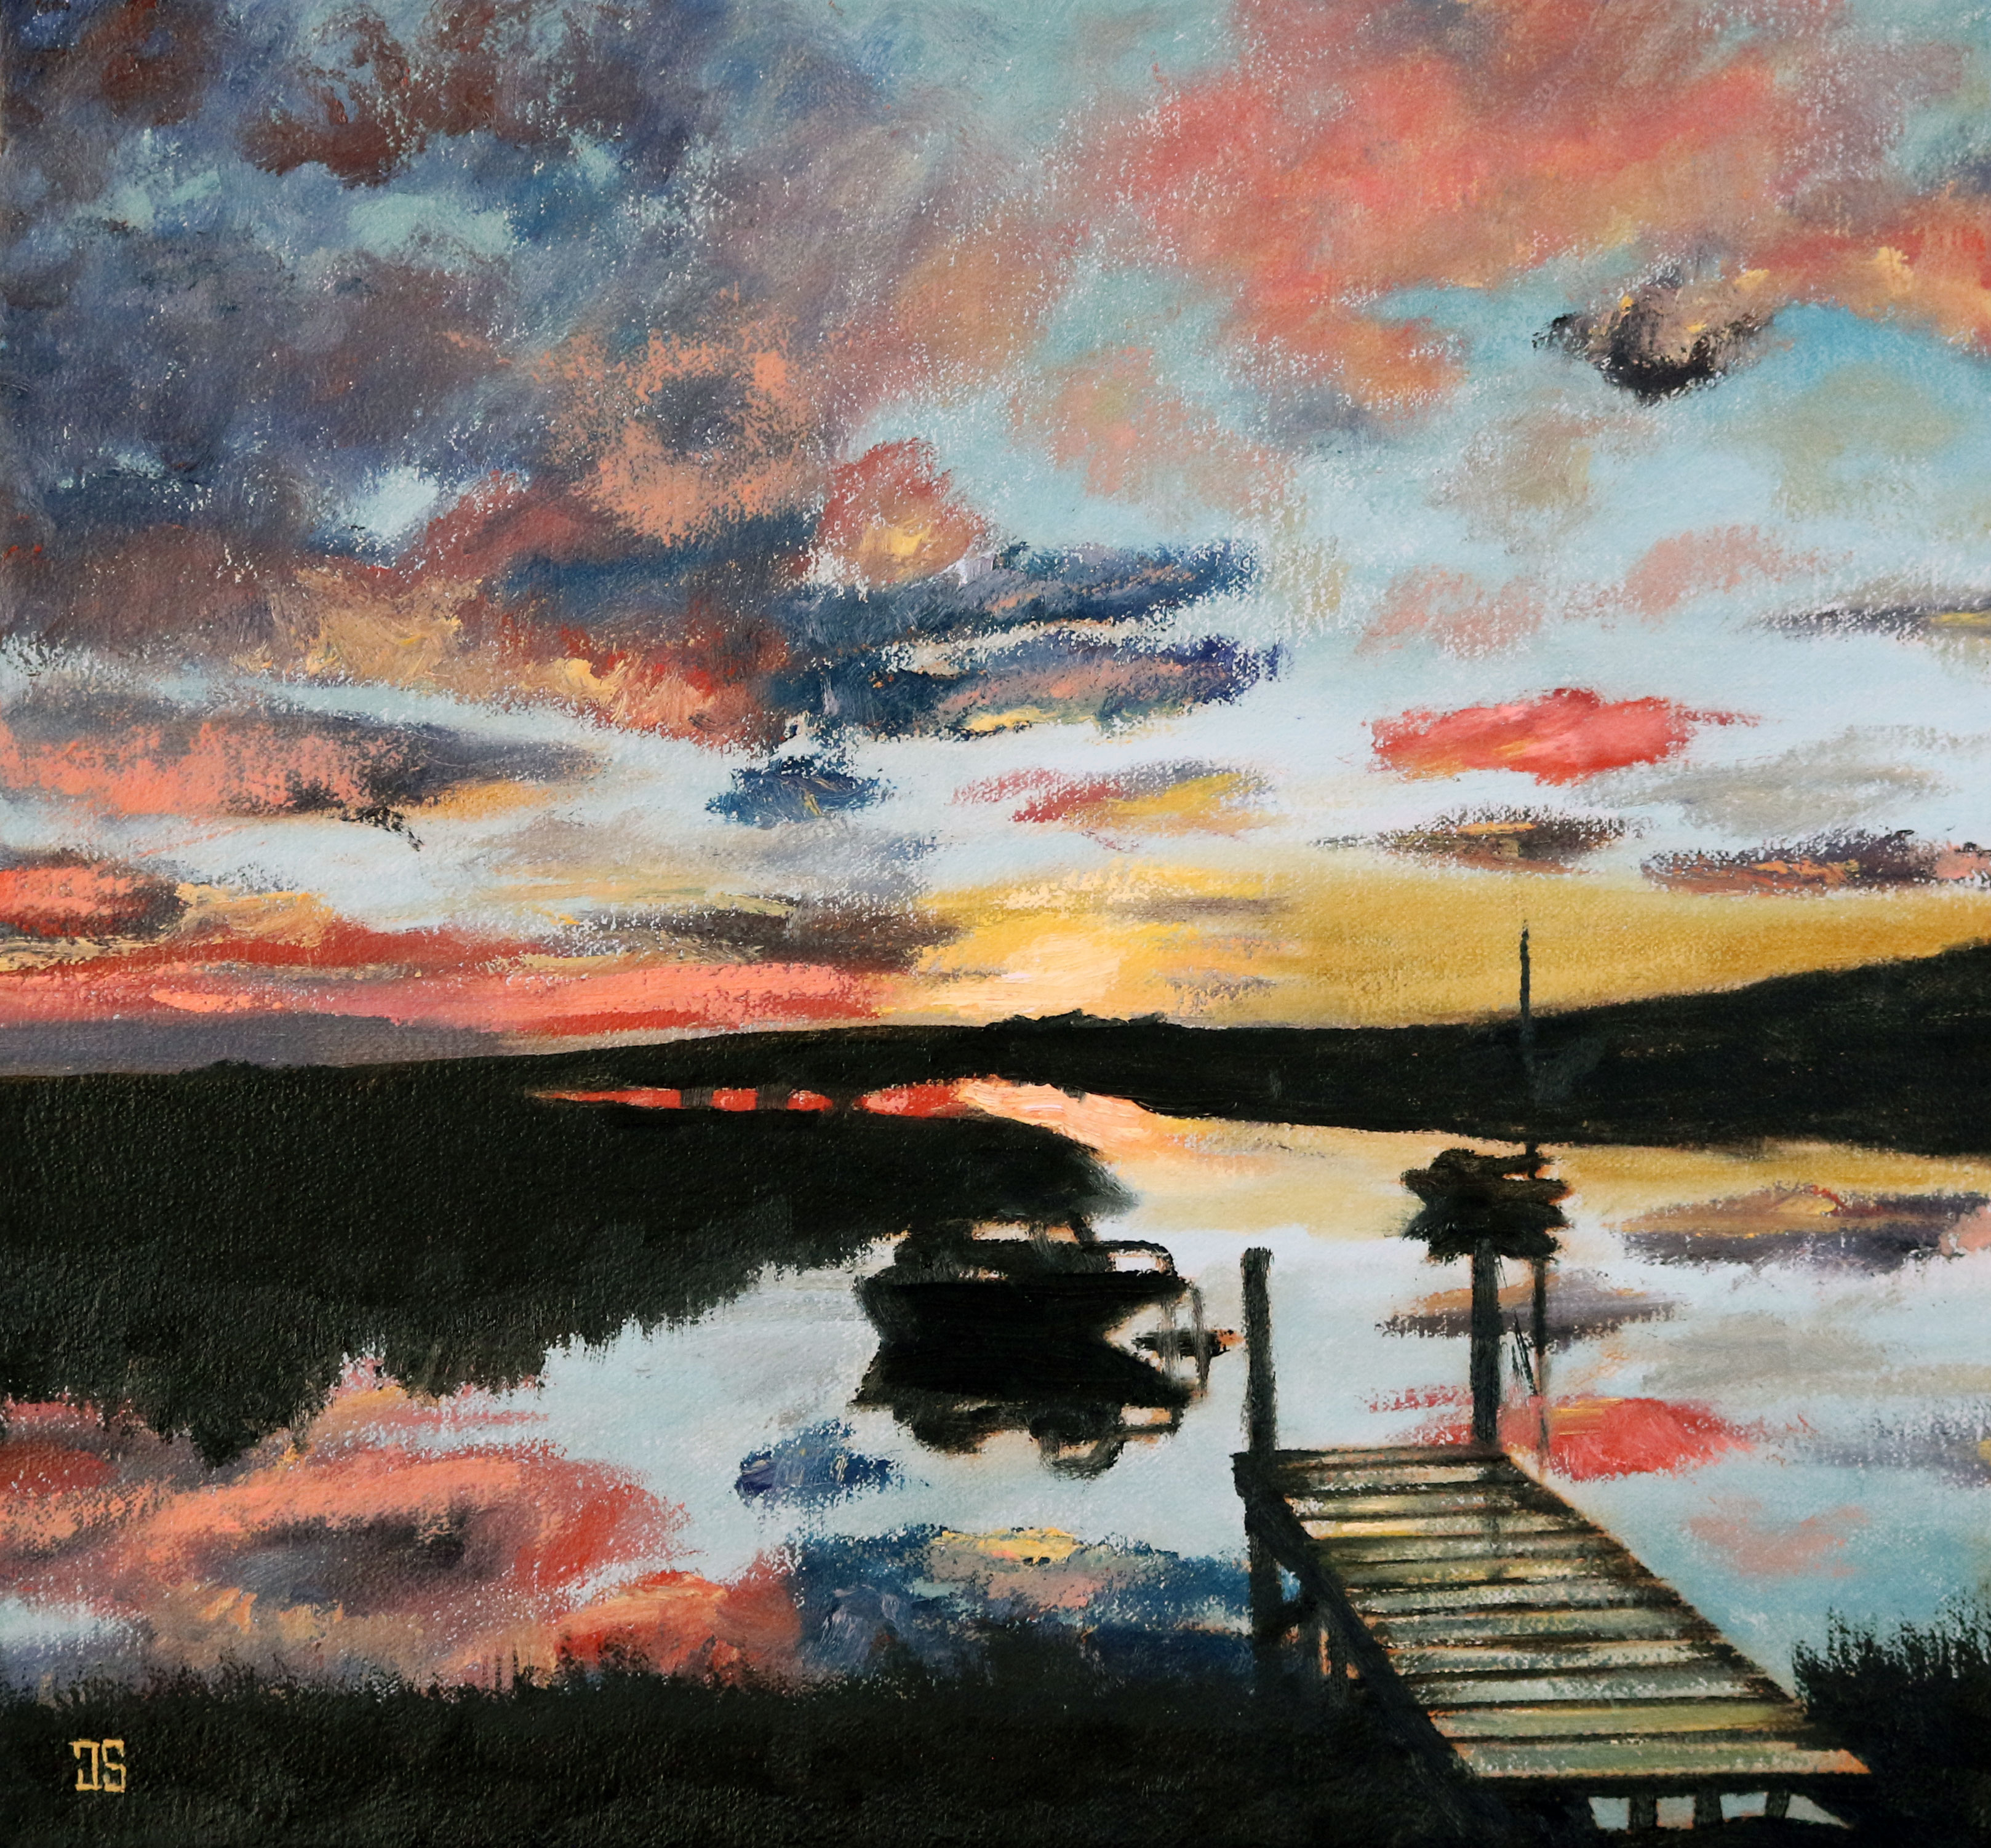 Oil painting "Sunrise at the Pier" by Jeffrey Dale Starr